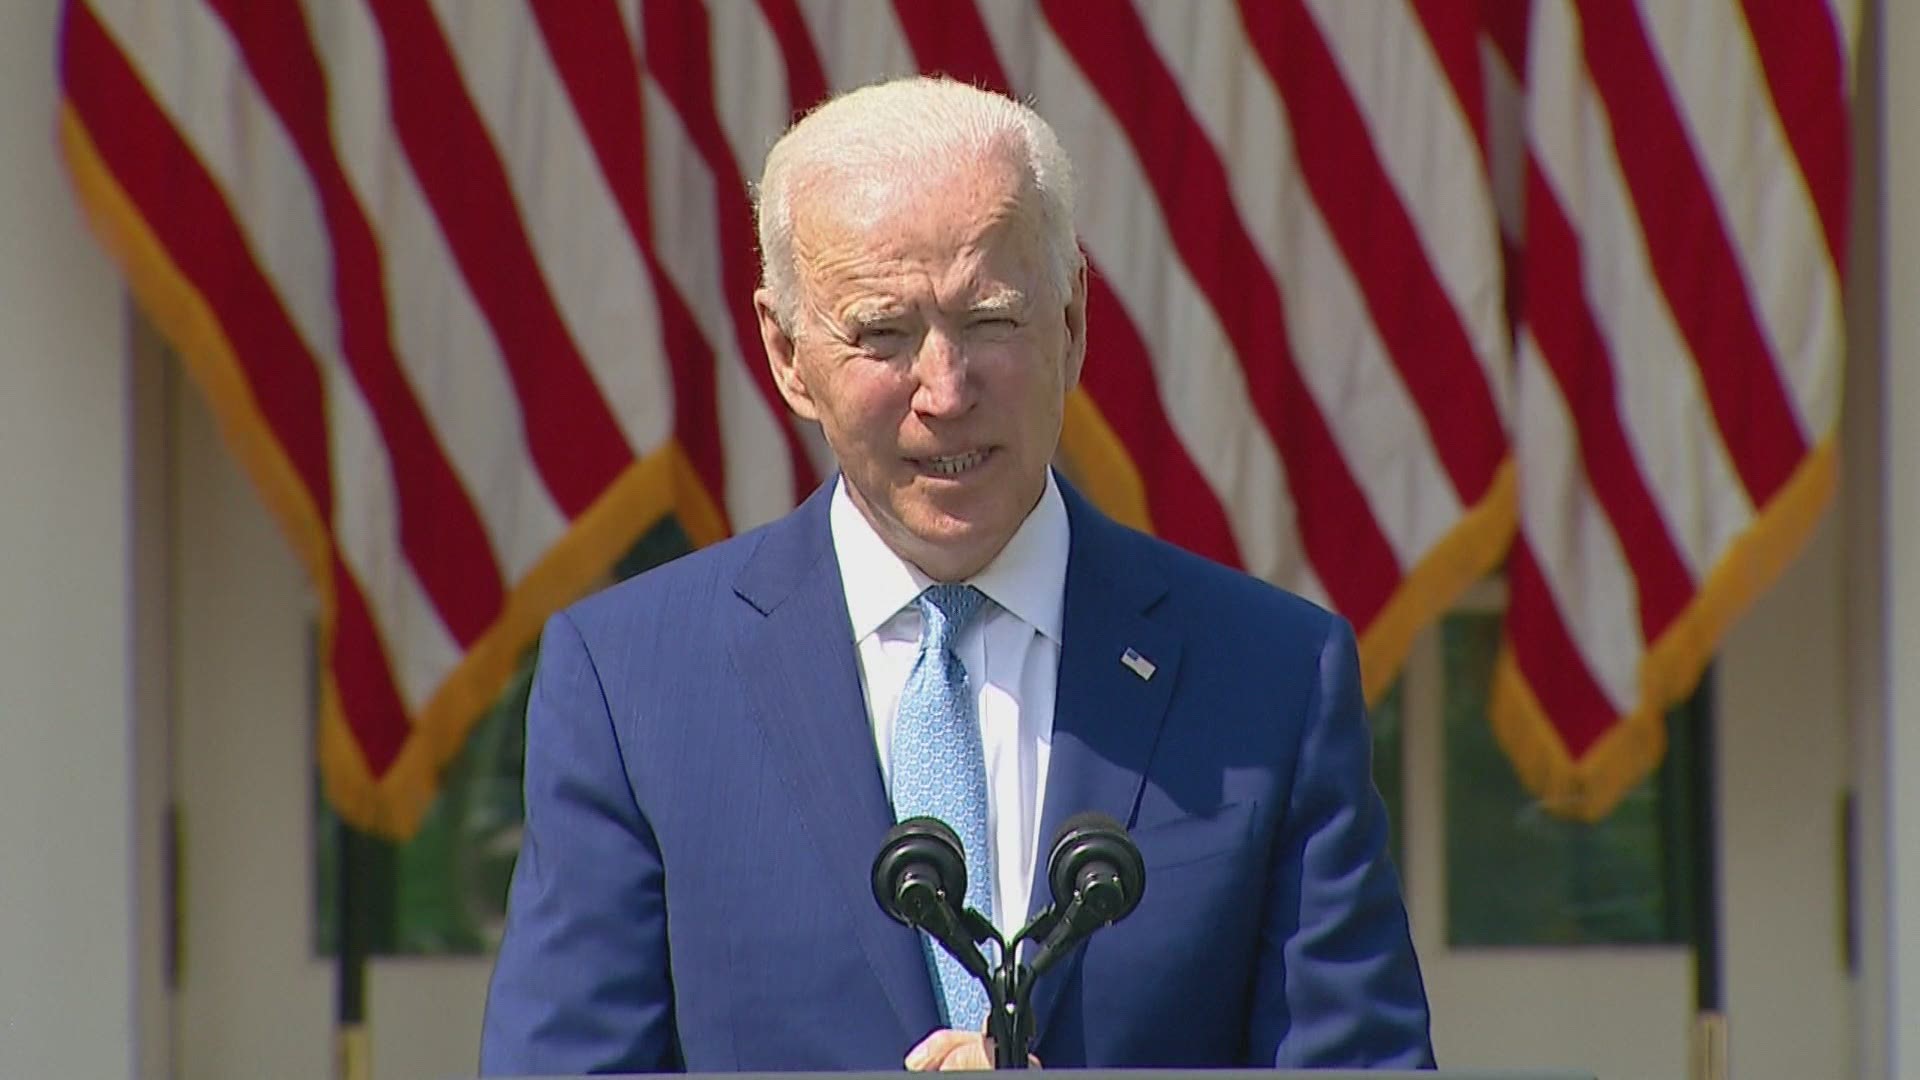 The Maine Republican Party quickly responded to President Biden's announcement, saying Maine's Constitution says the right to bear arms shall never be questioned.